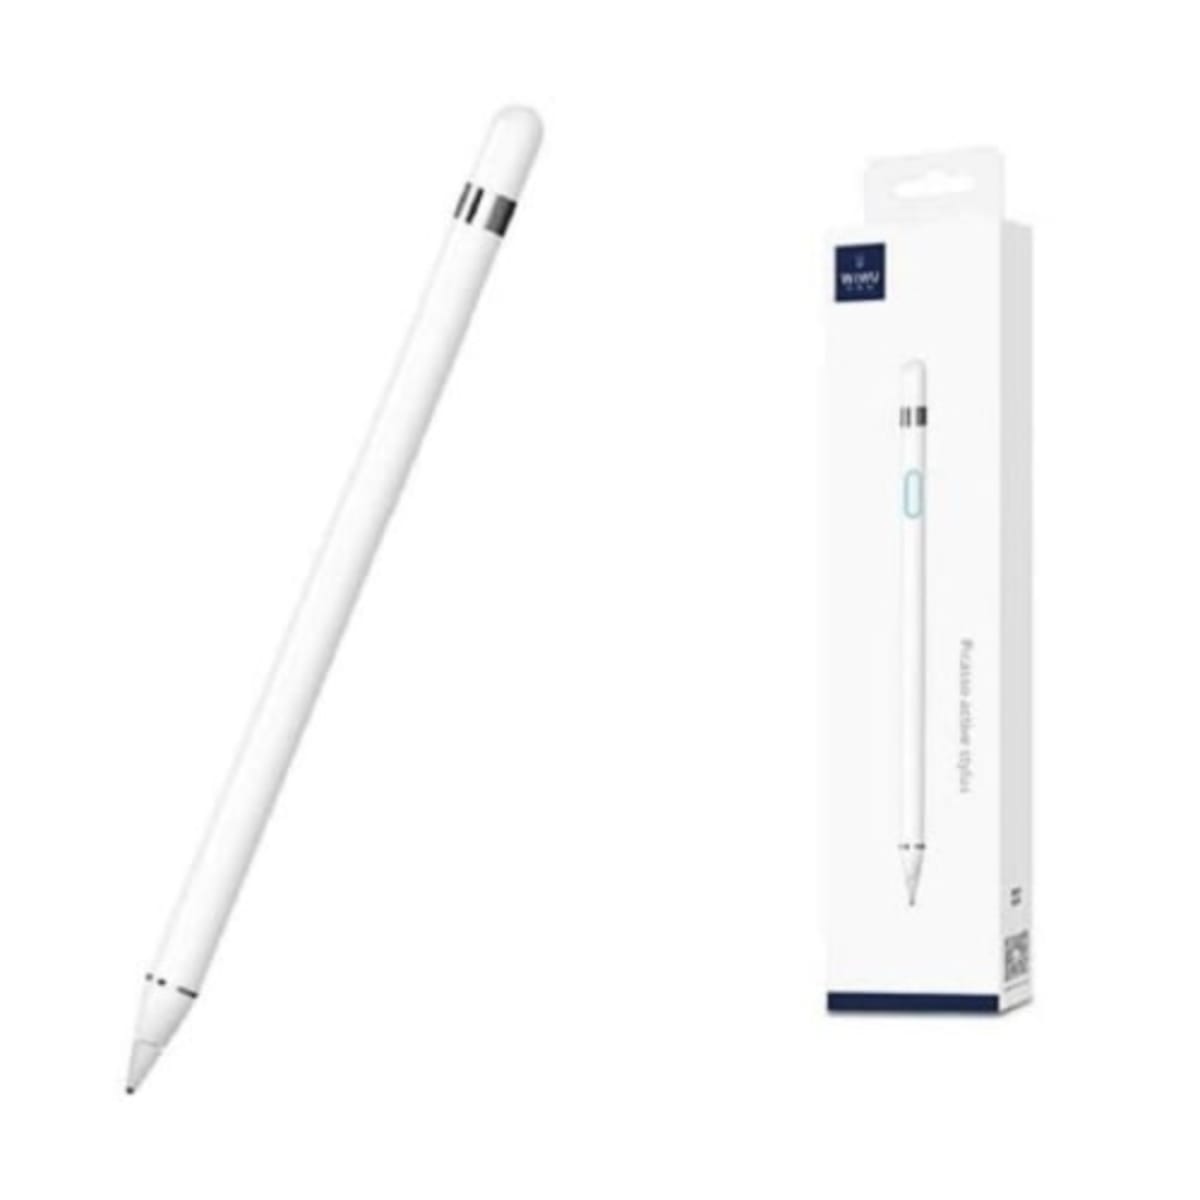 costilla Experto Dar a luz Samsung Stylus Smart Pencil For iPad/iPhone/android Tablets | Konga Online  Shopping